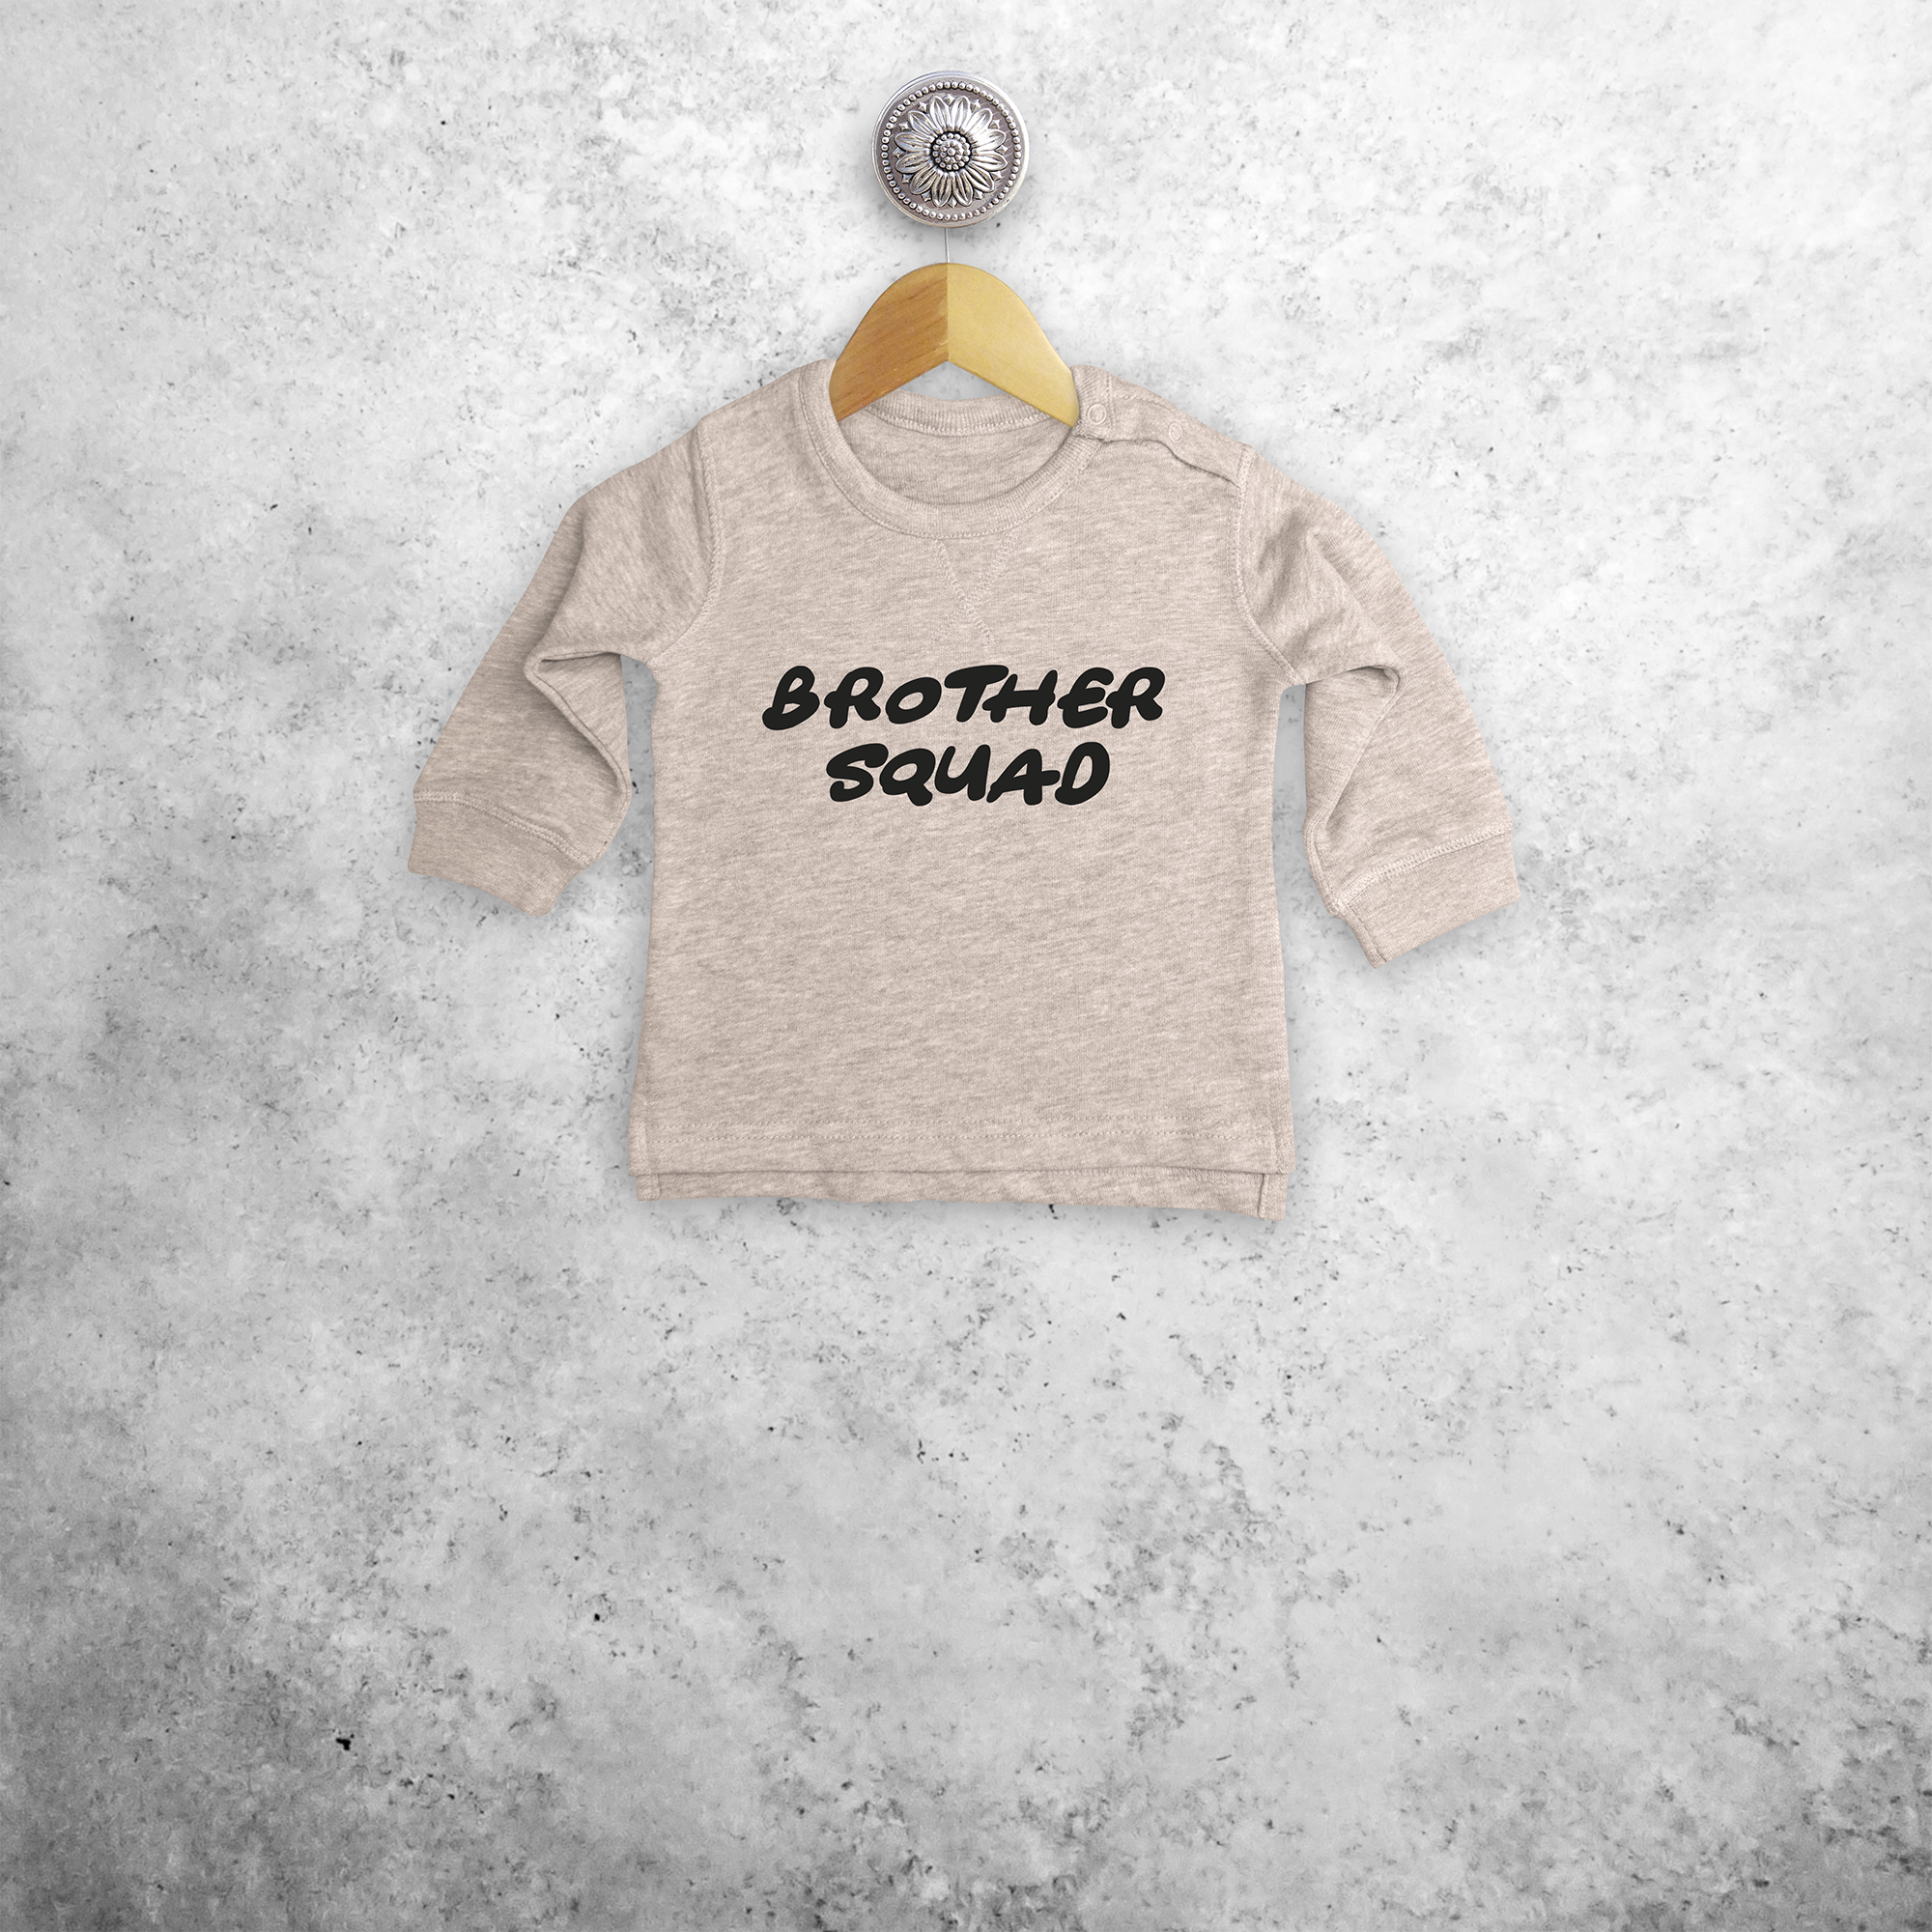 'Brother squad' baby sweater